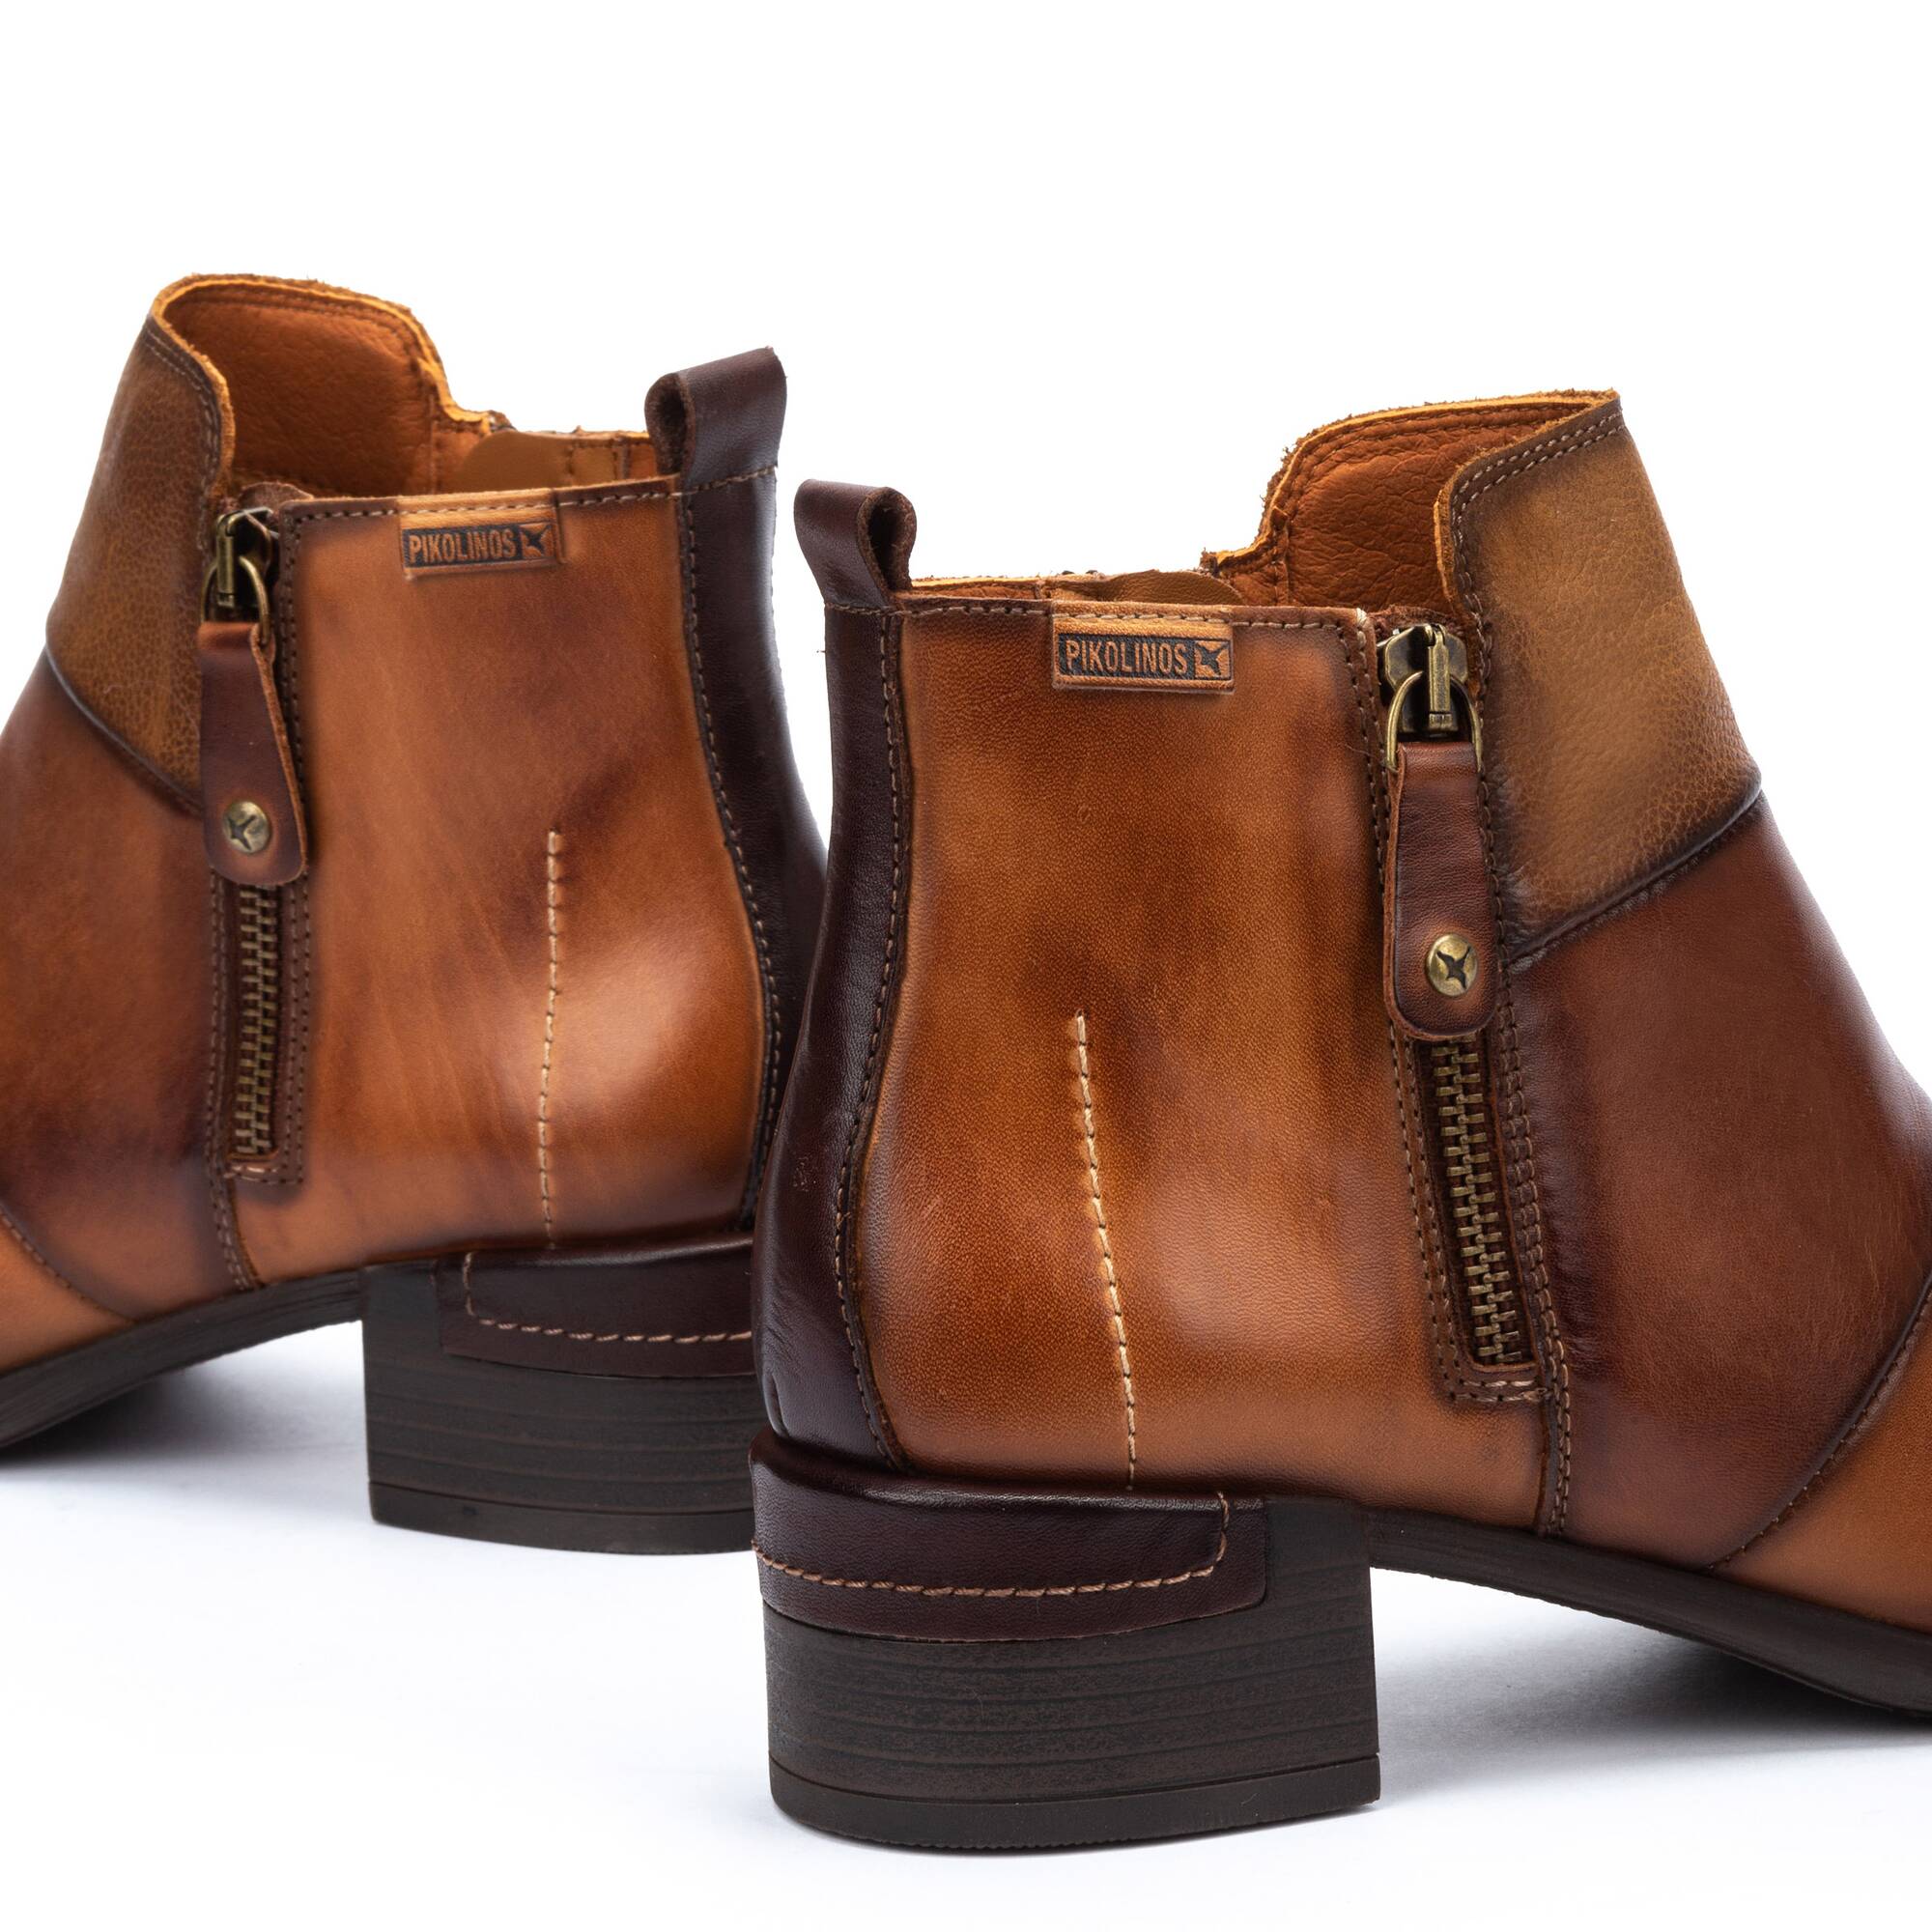 Ankle boots | MALAGA W6W-8616C1, BRANDY, large image number 60 | null